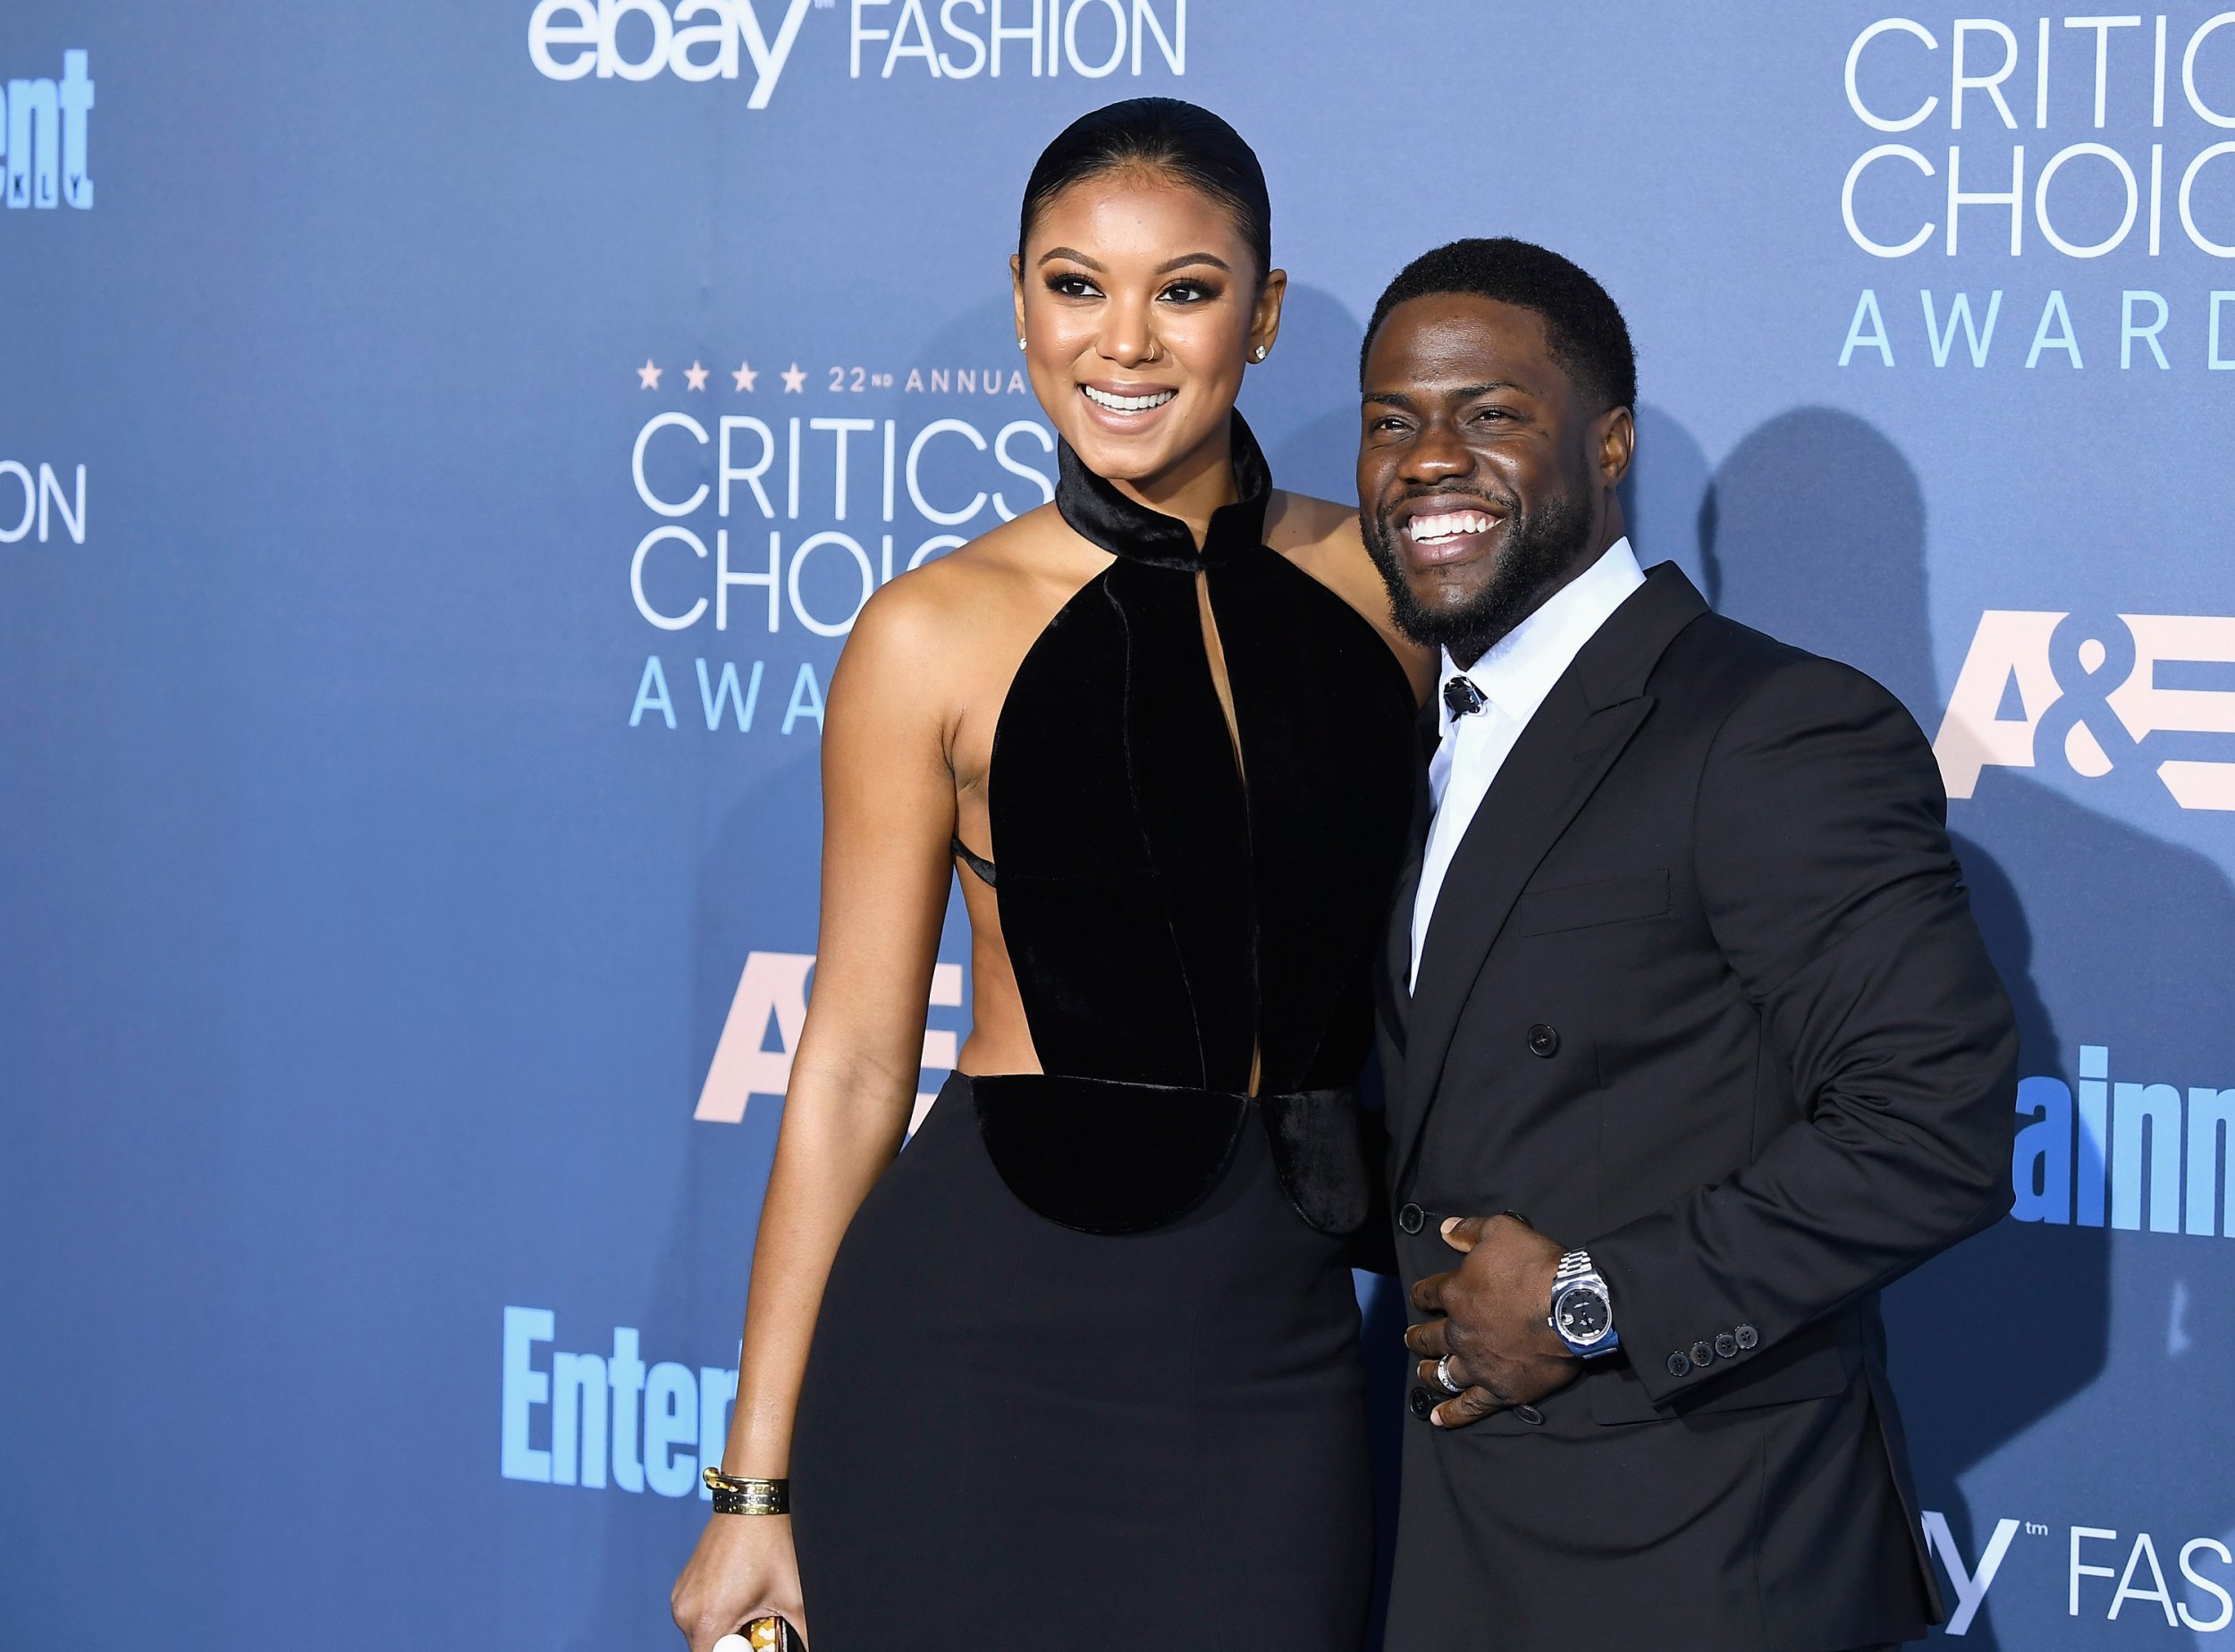 Kevin Hart recovering well after undergoing back surgery, wife says